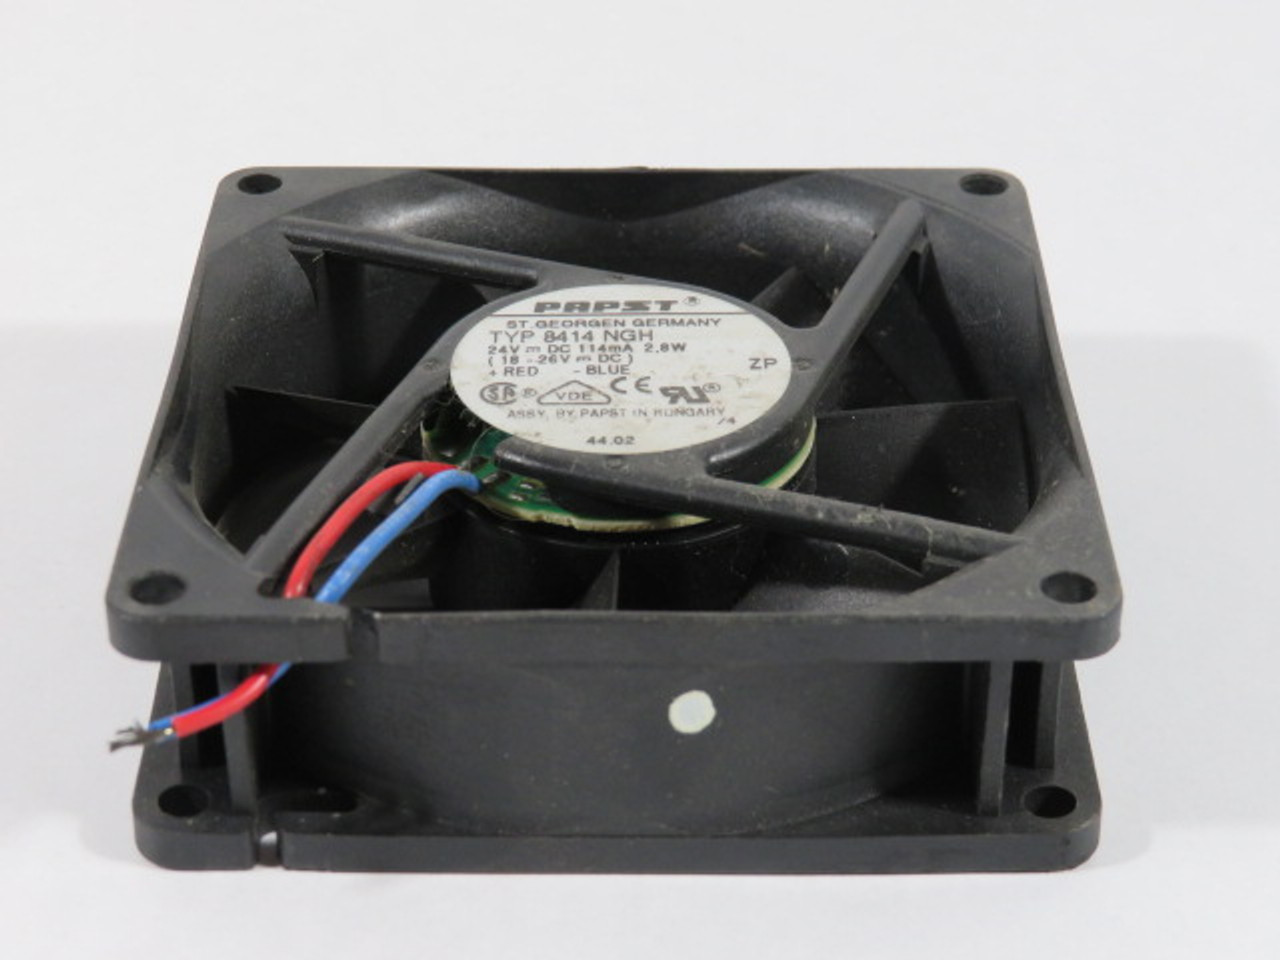 EBMPapst 8414 NGH Axial Fan 24V 2.8W USED